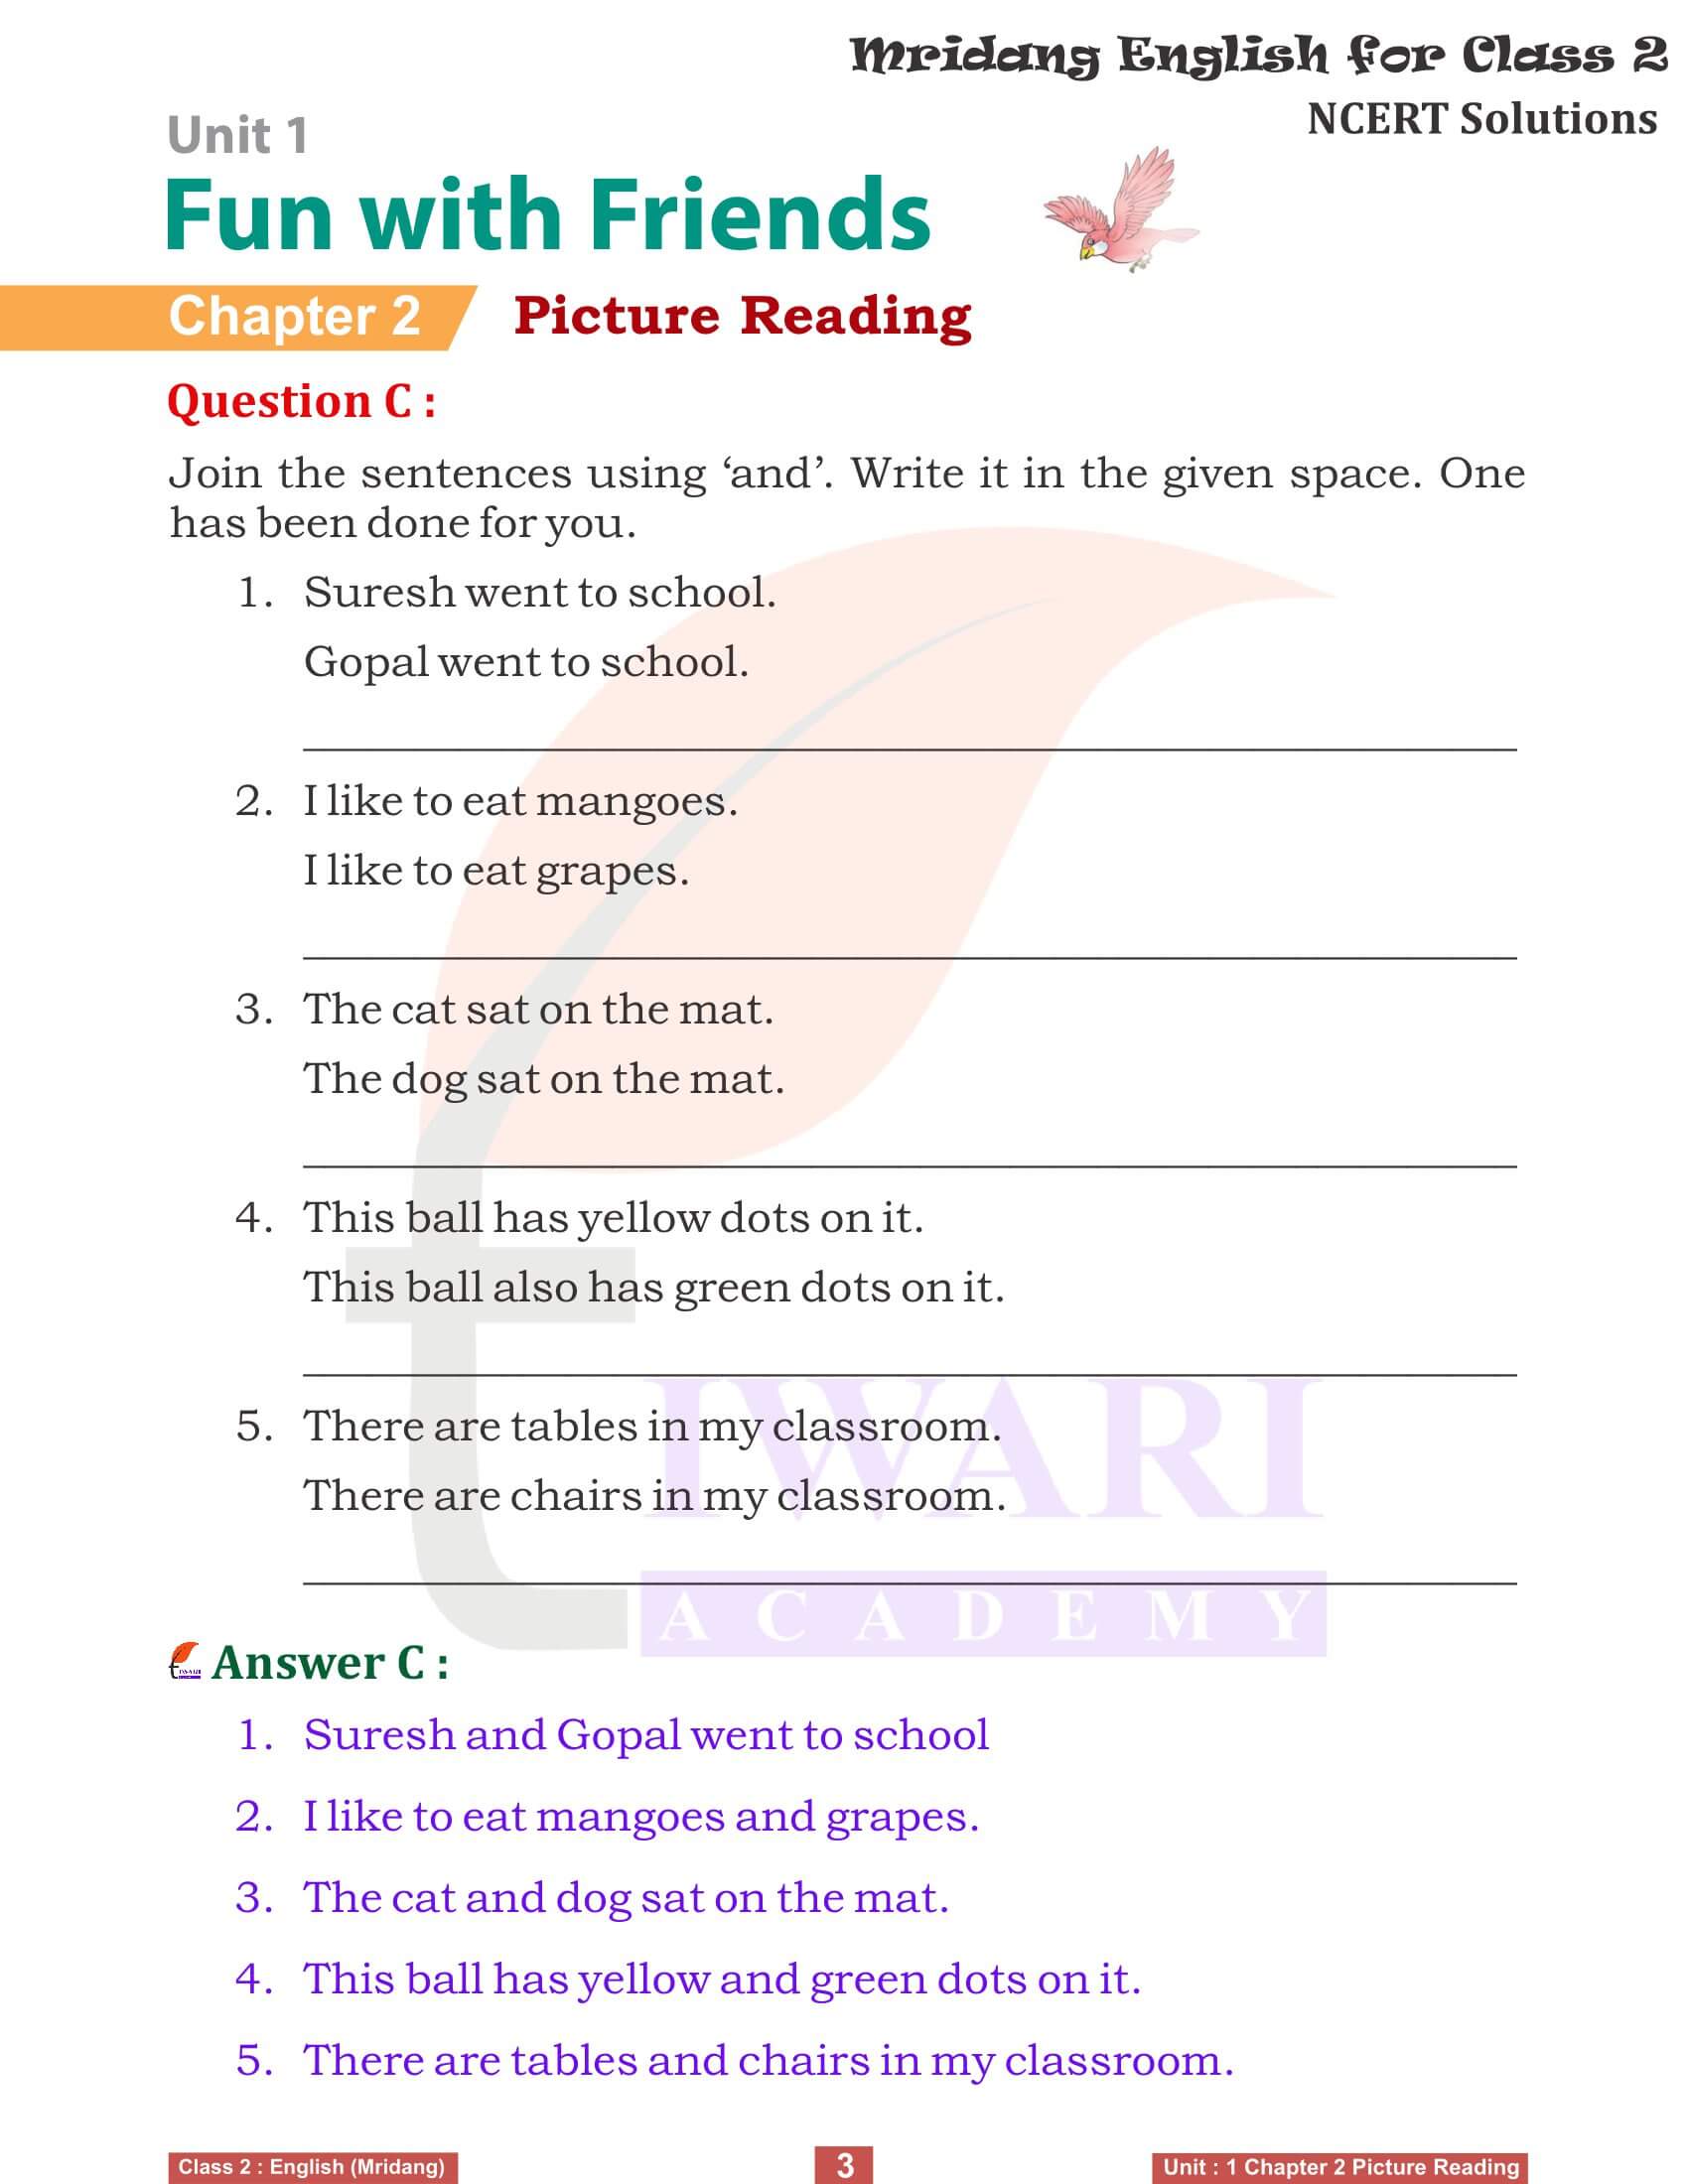 NCERT Solutions for Class 2 English Mridang Unit 1 Fun with Friends Chapter 2 Picture Reading Answers